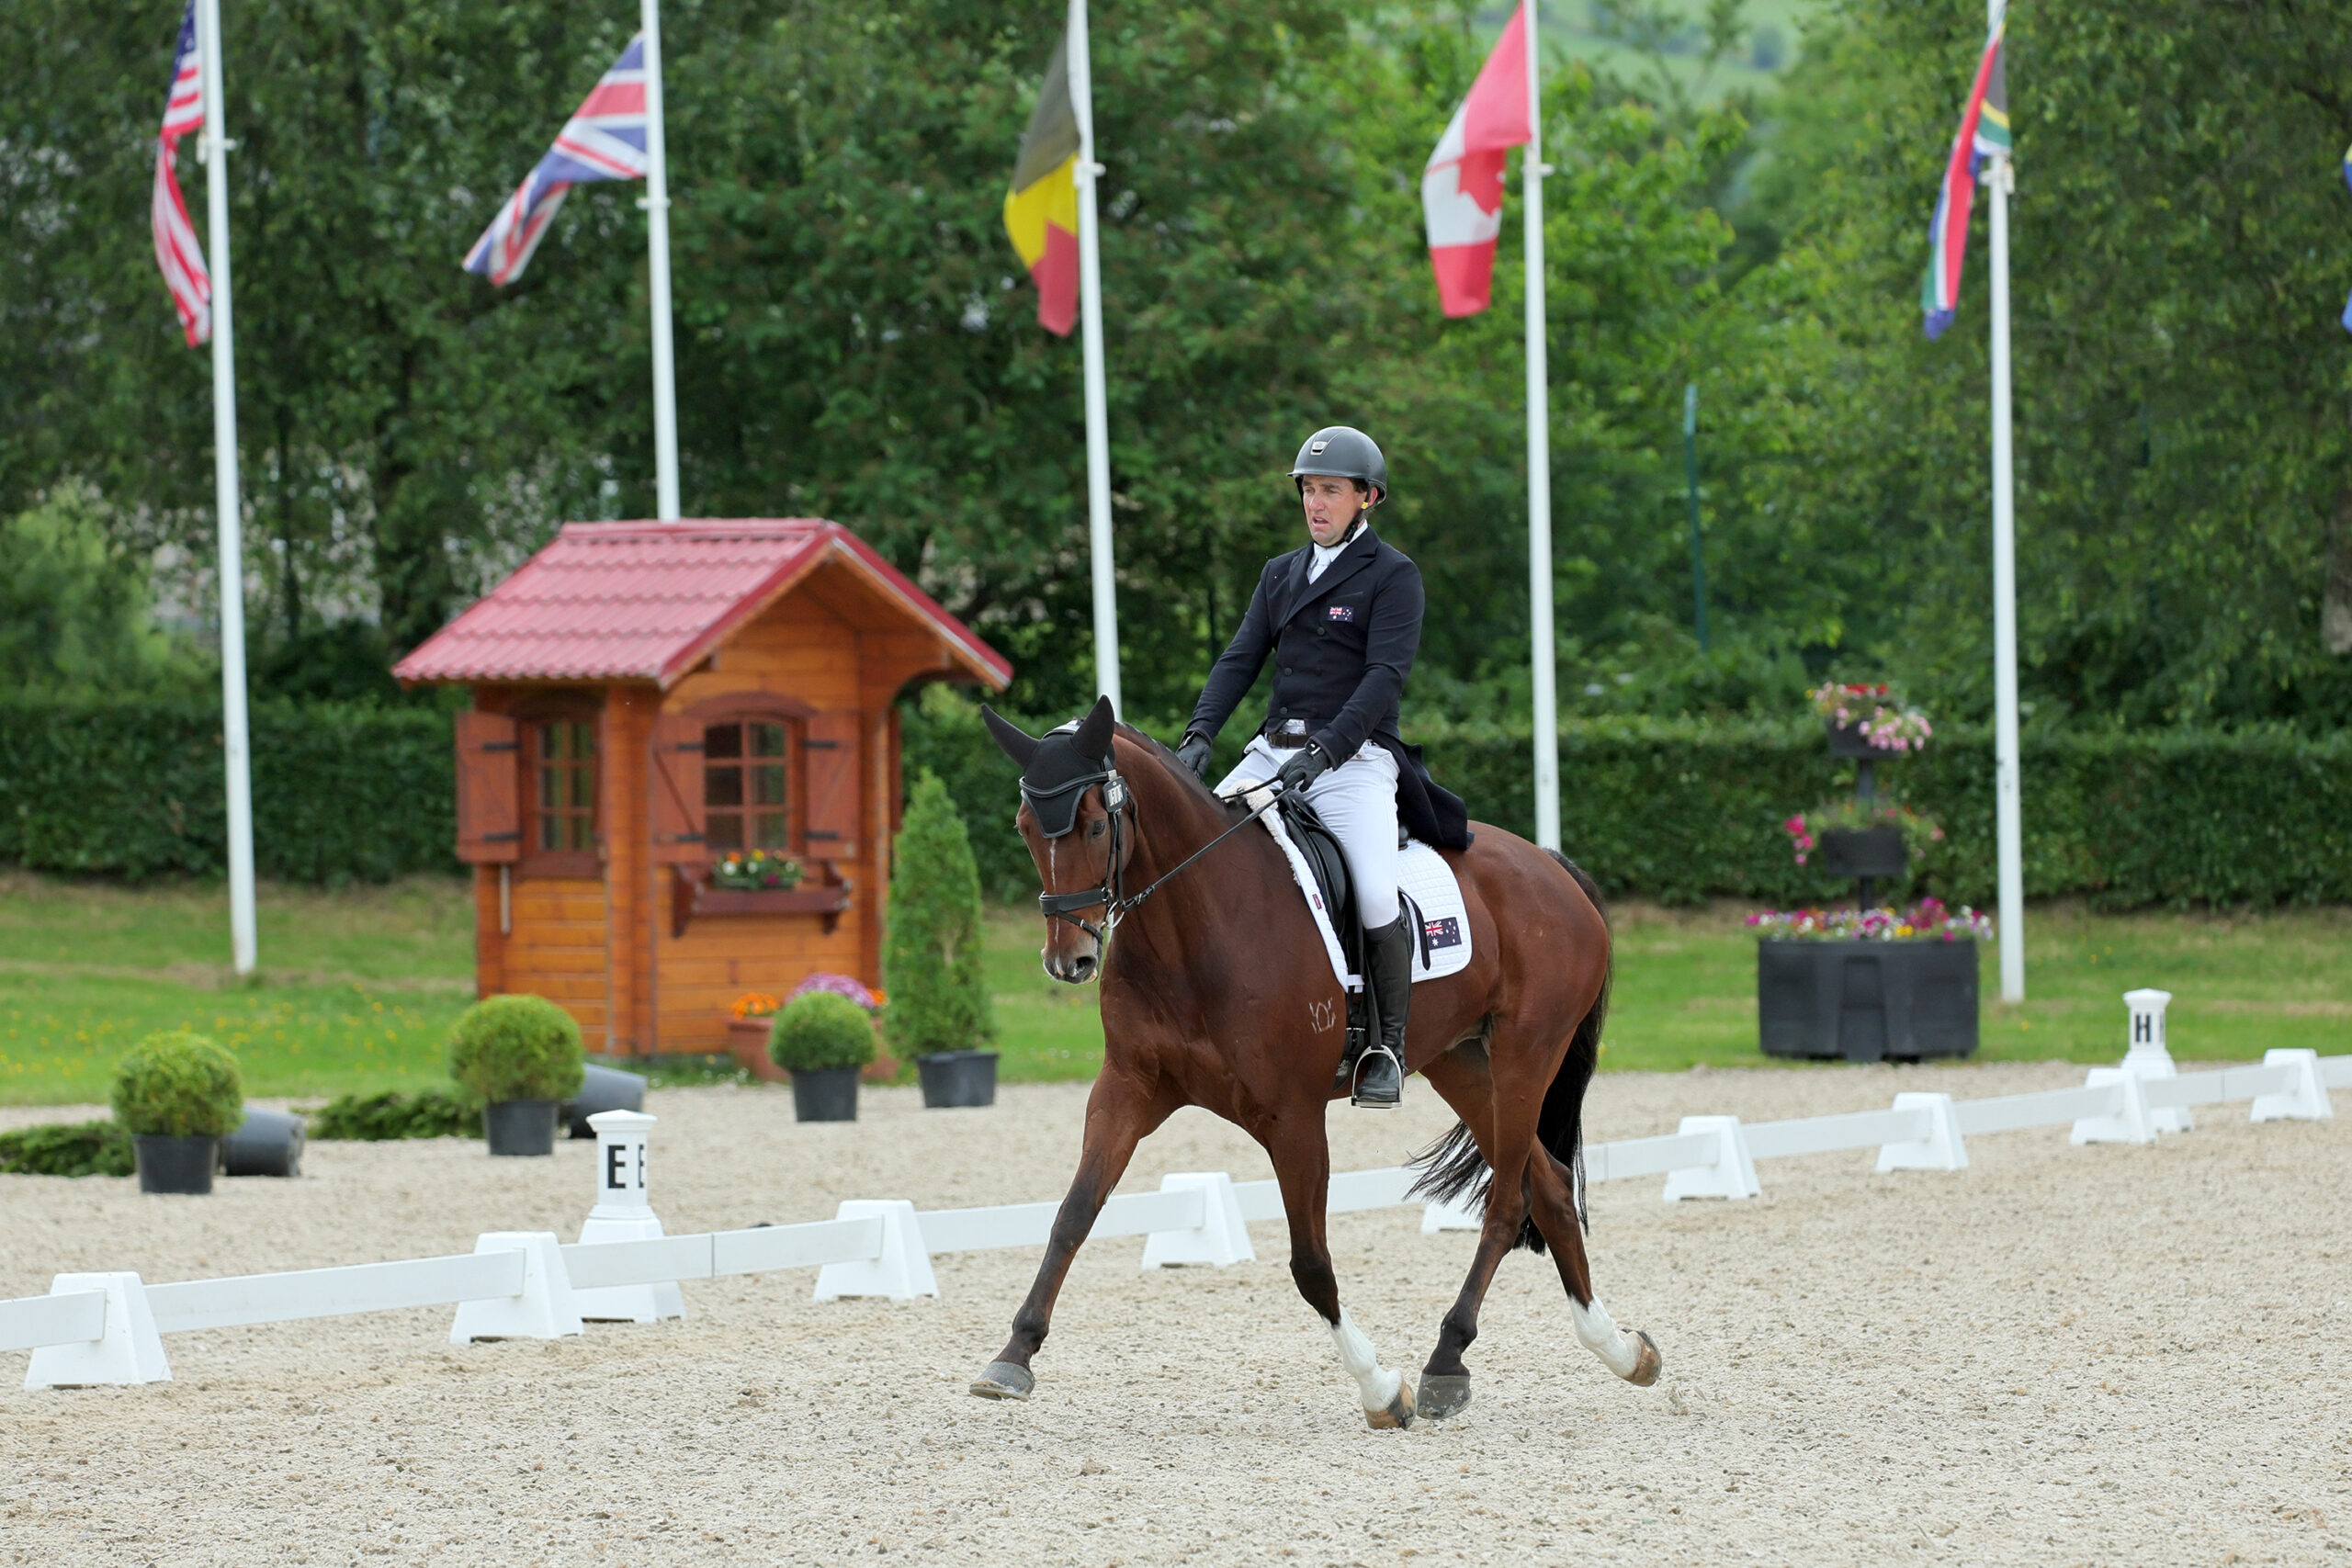 Australia leads the nations at Millstreet International Horse Trials